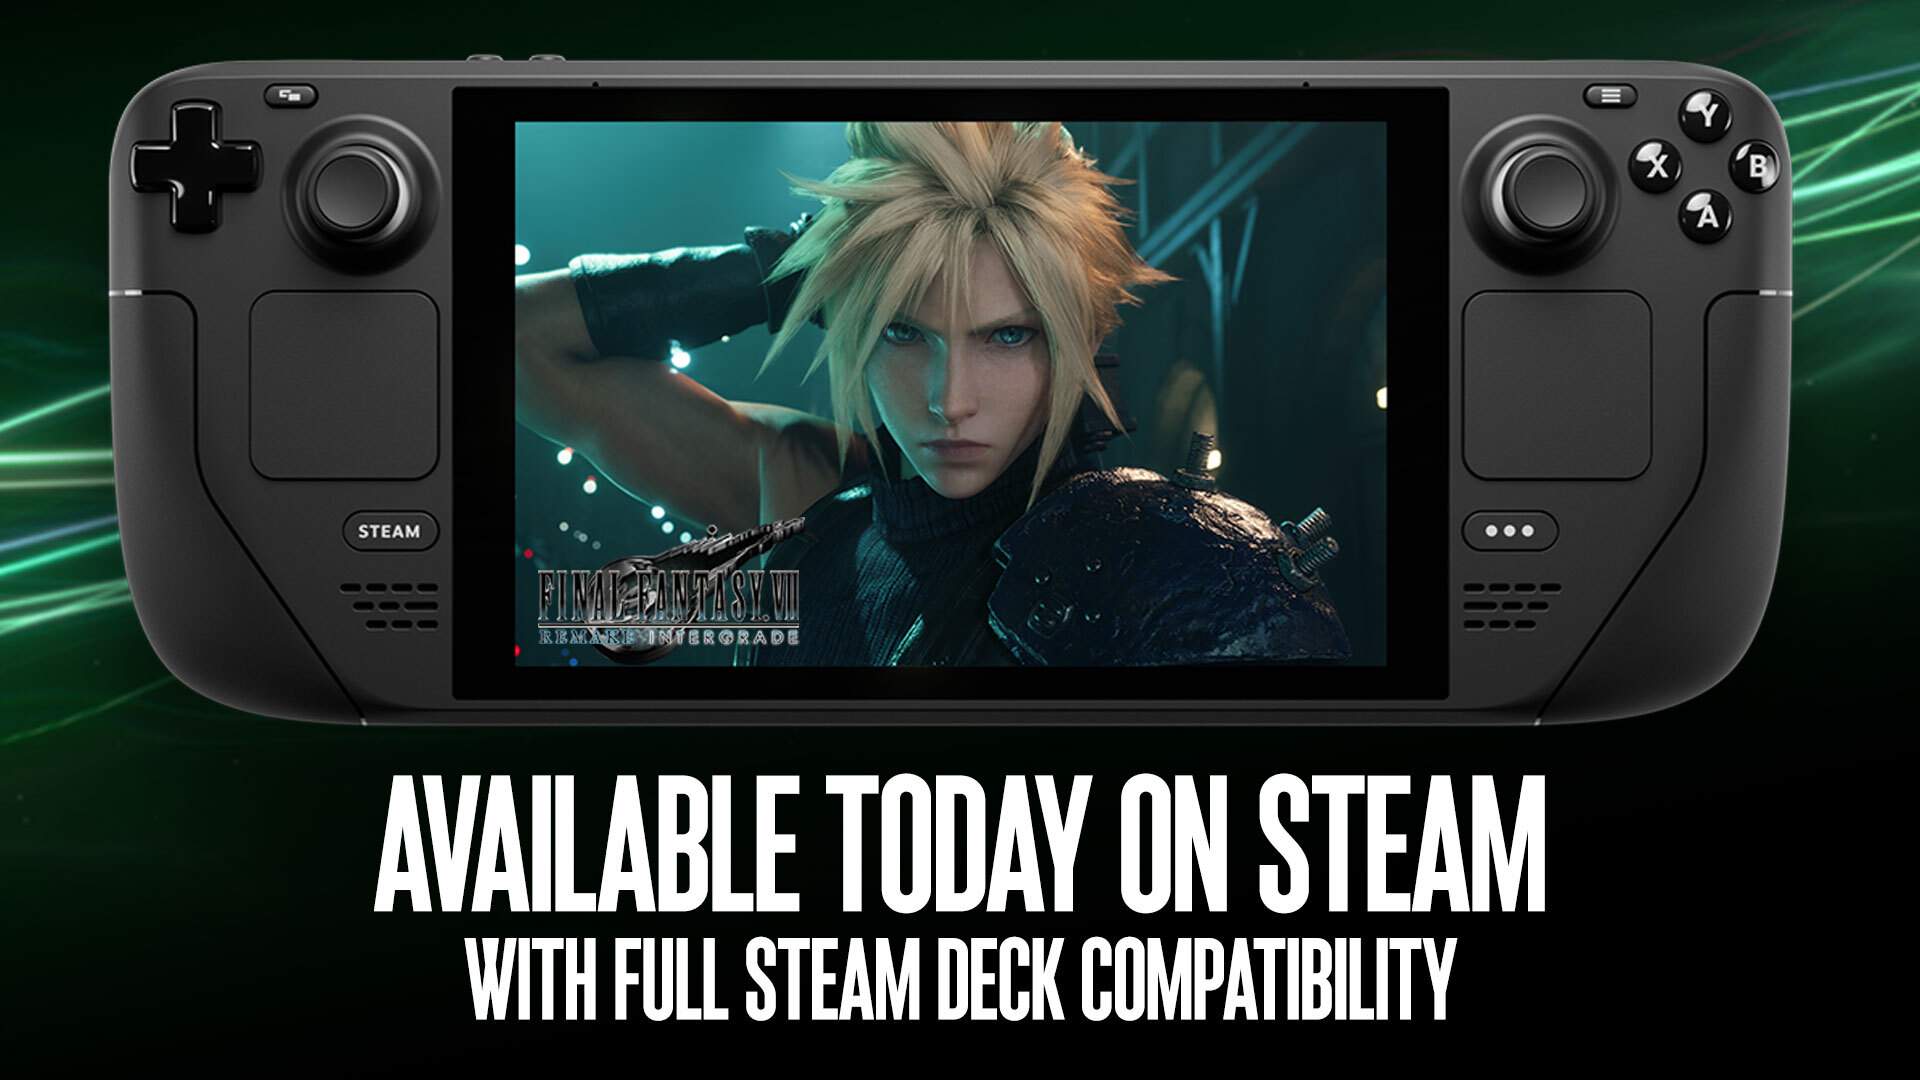 Picture of Steam Deck with Cloud Strife on the screen with AVAILABLE TODAY message.